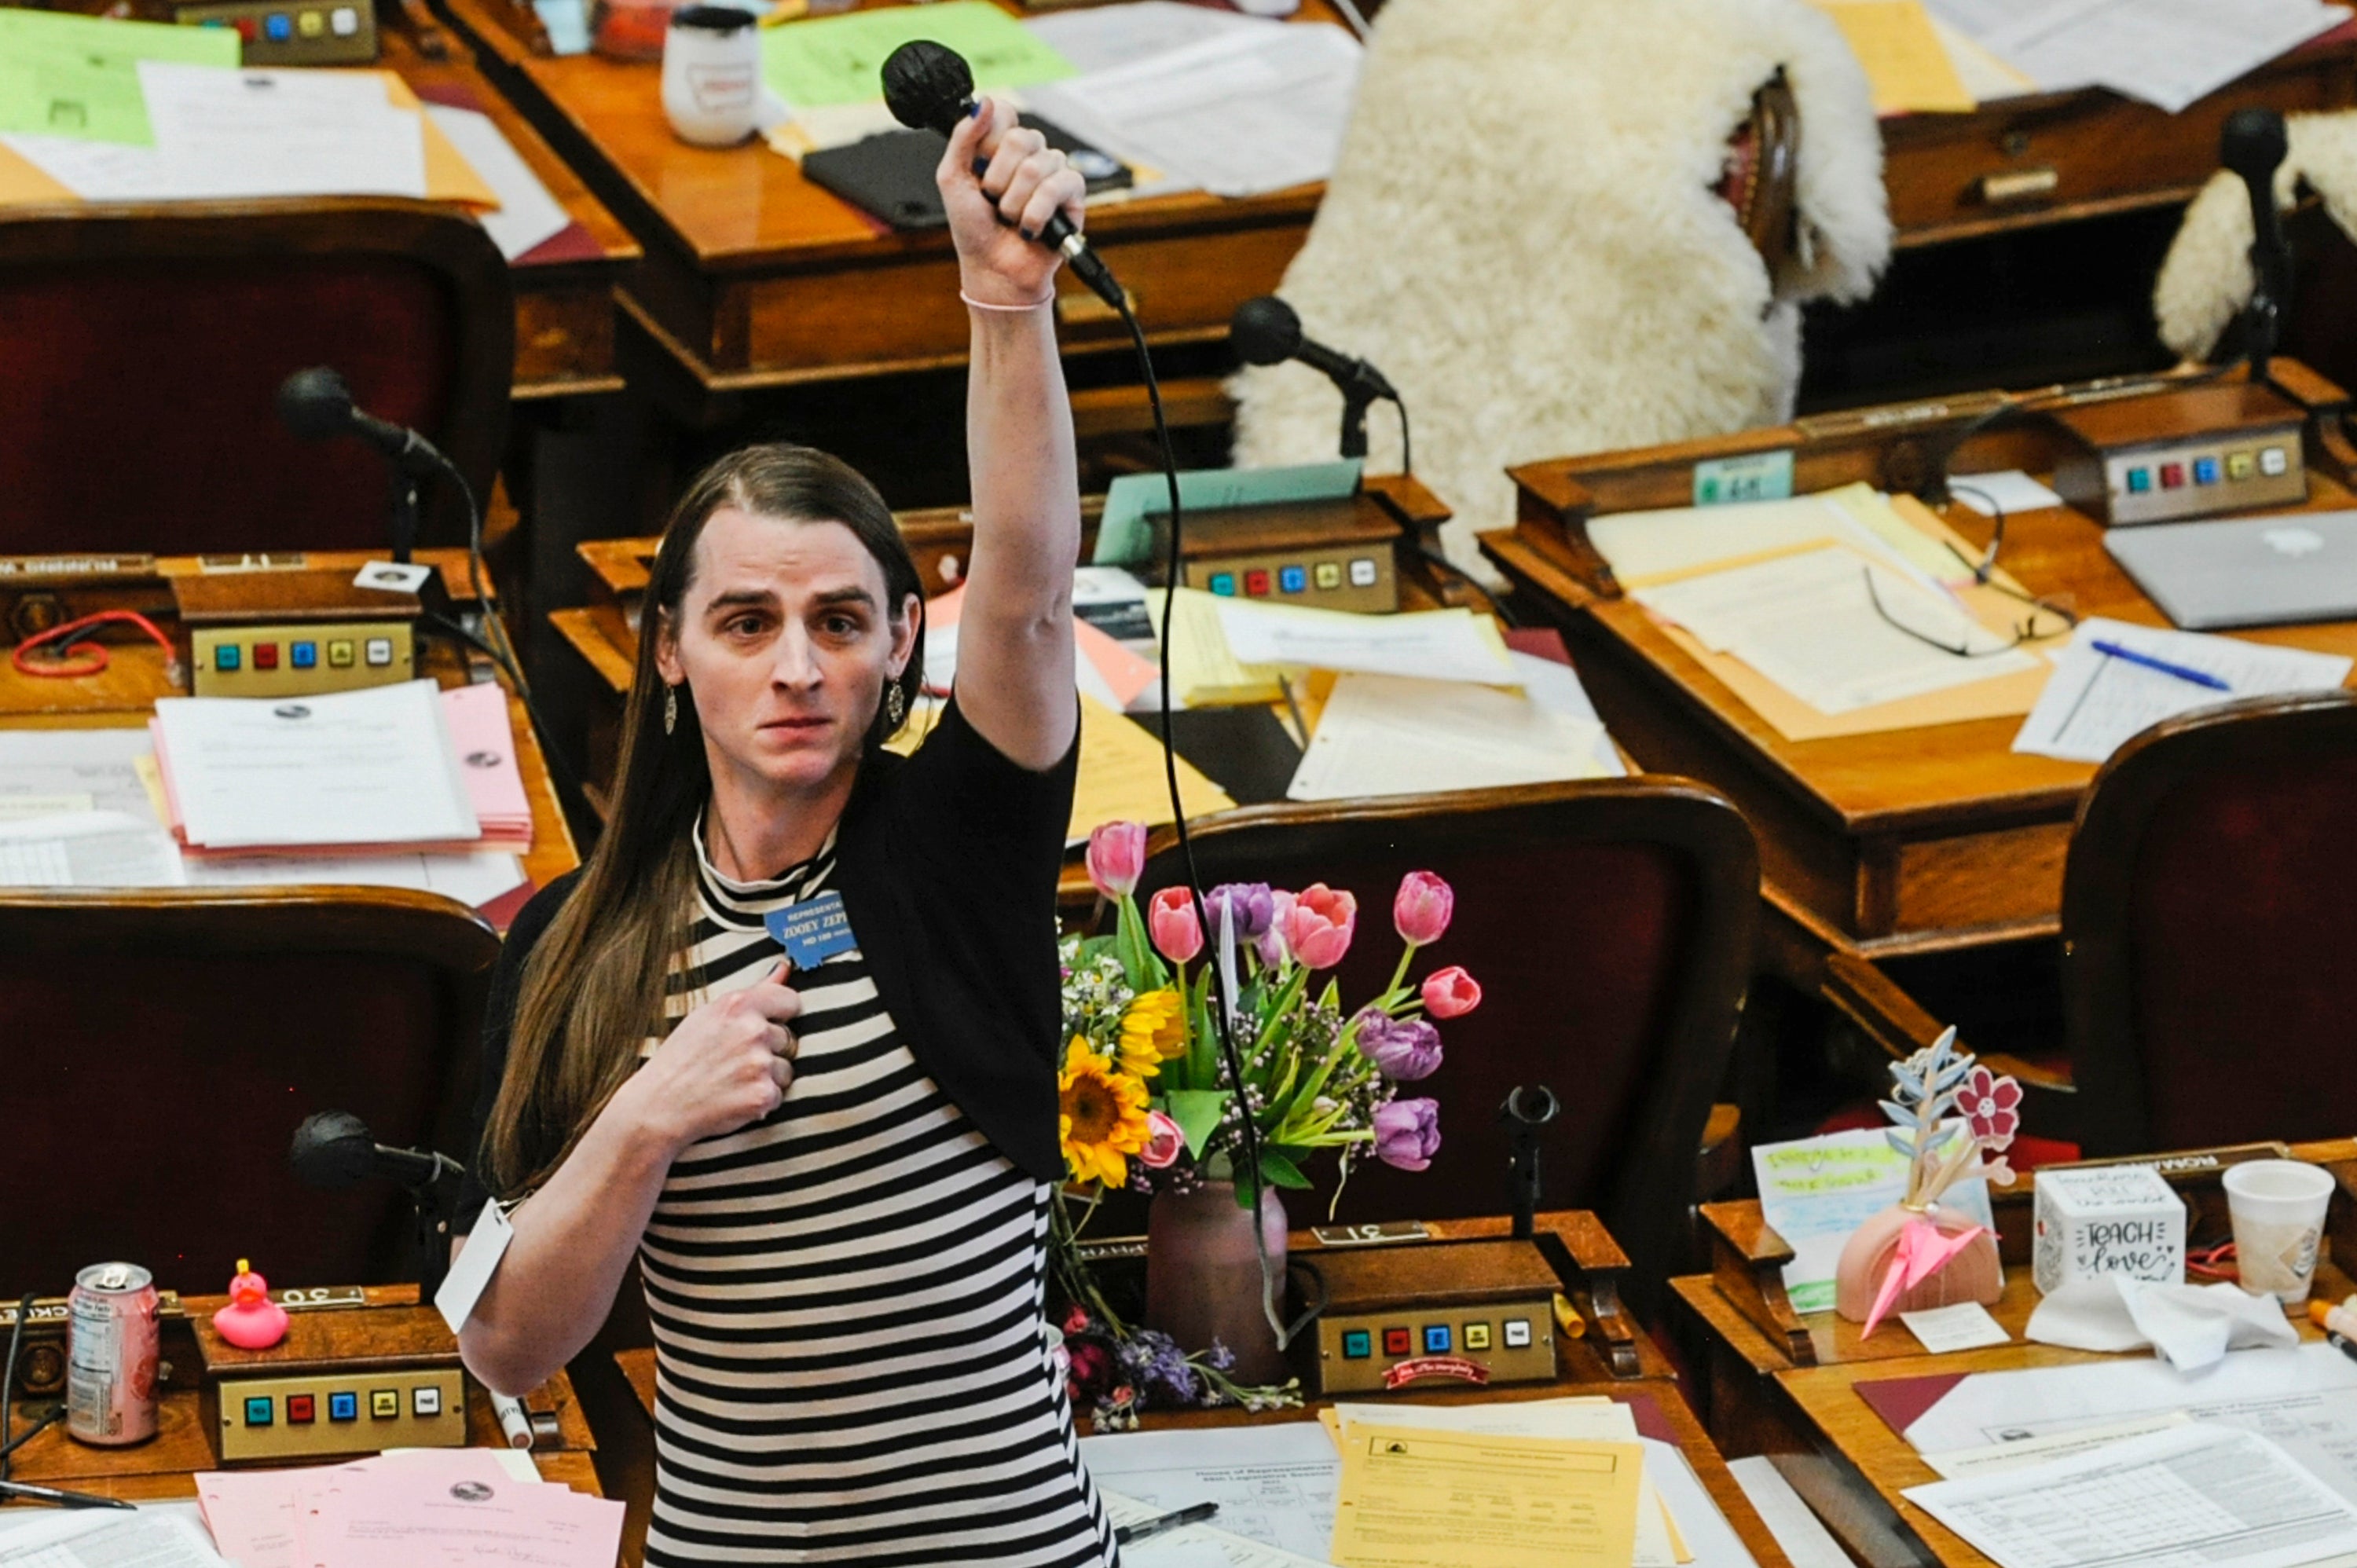 Zooey Zephyr stands in protest as demonstrators are arrested in the House gallery at the state capitol in Helena, Montana on 24 April